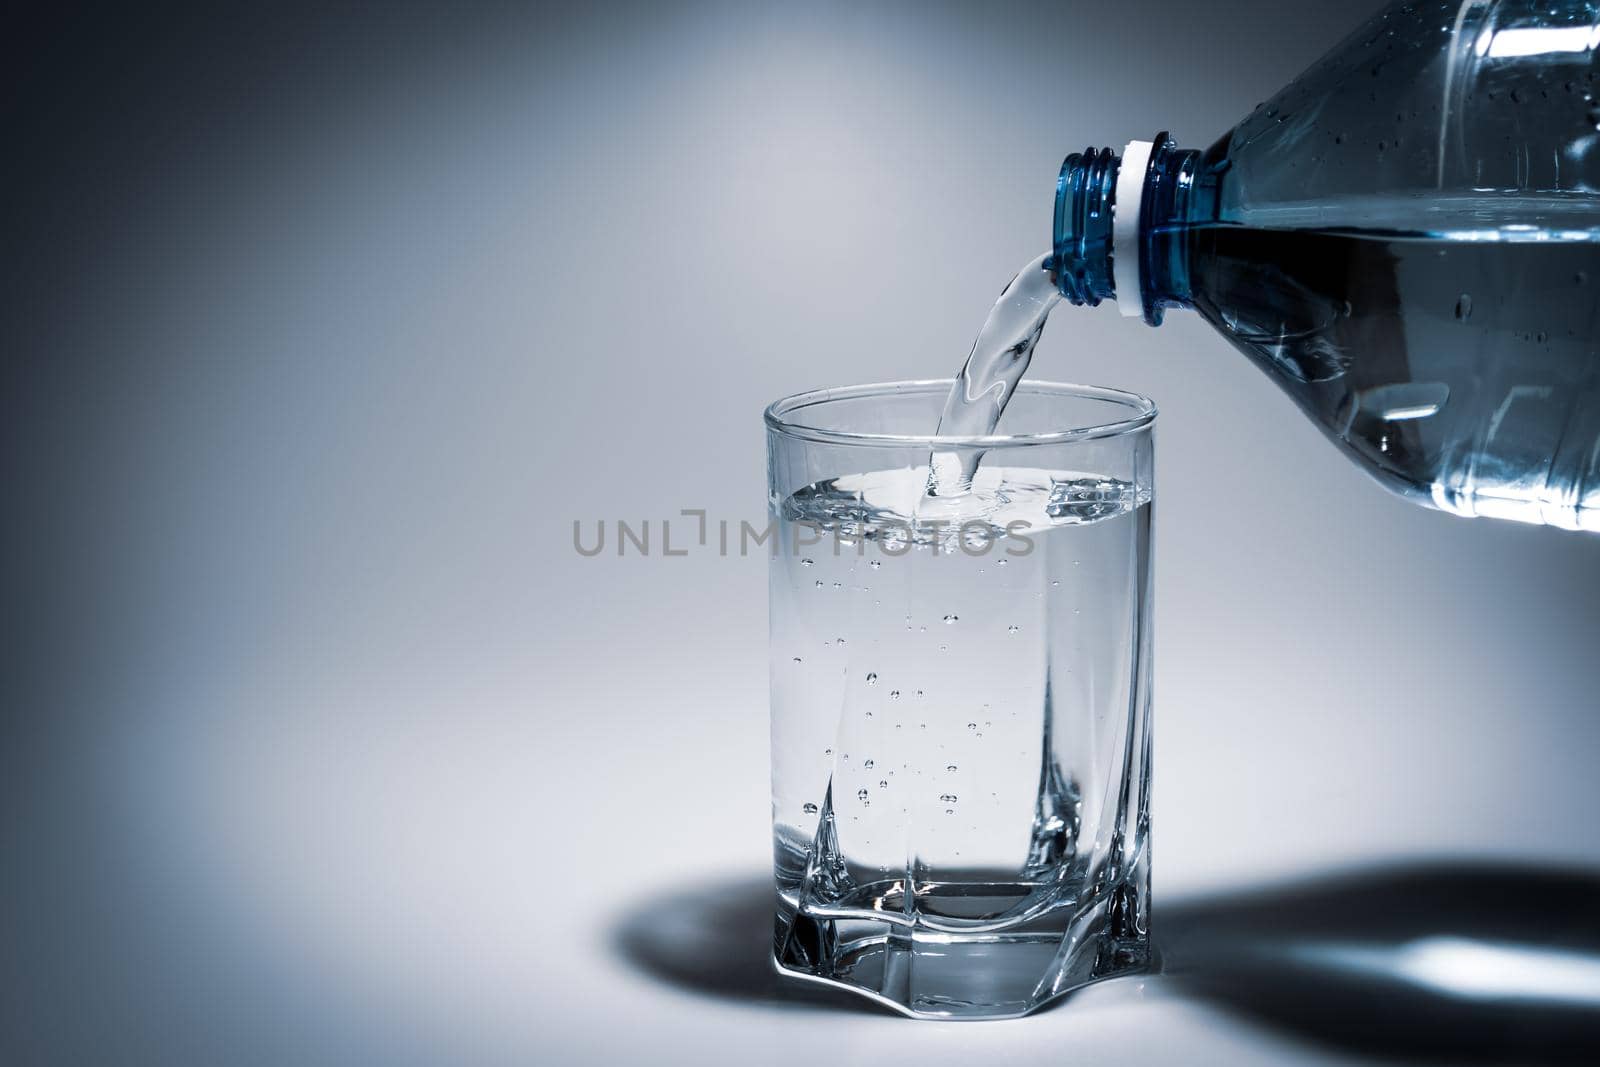 Pouring water into a glass from a plastic bottle. Light contrasting background with veneering.